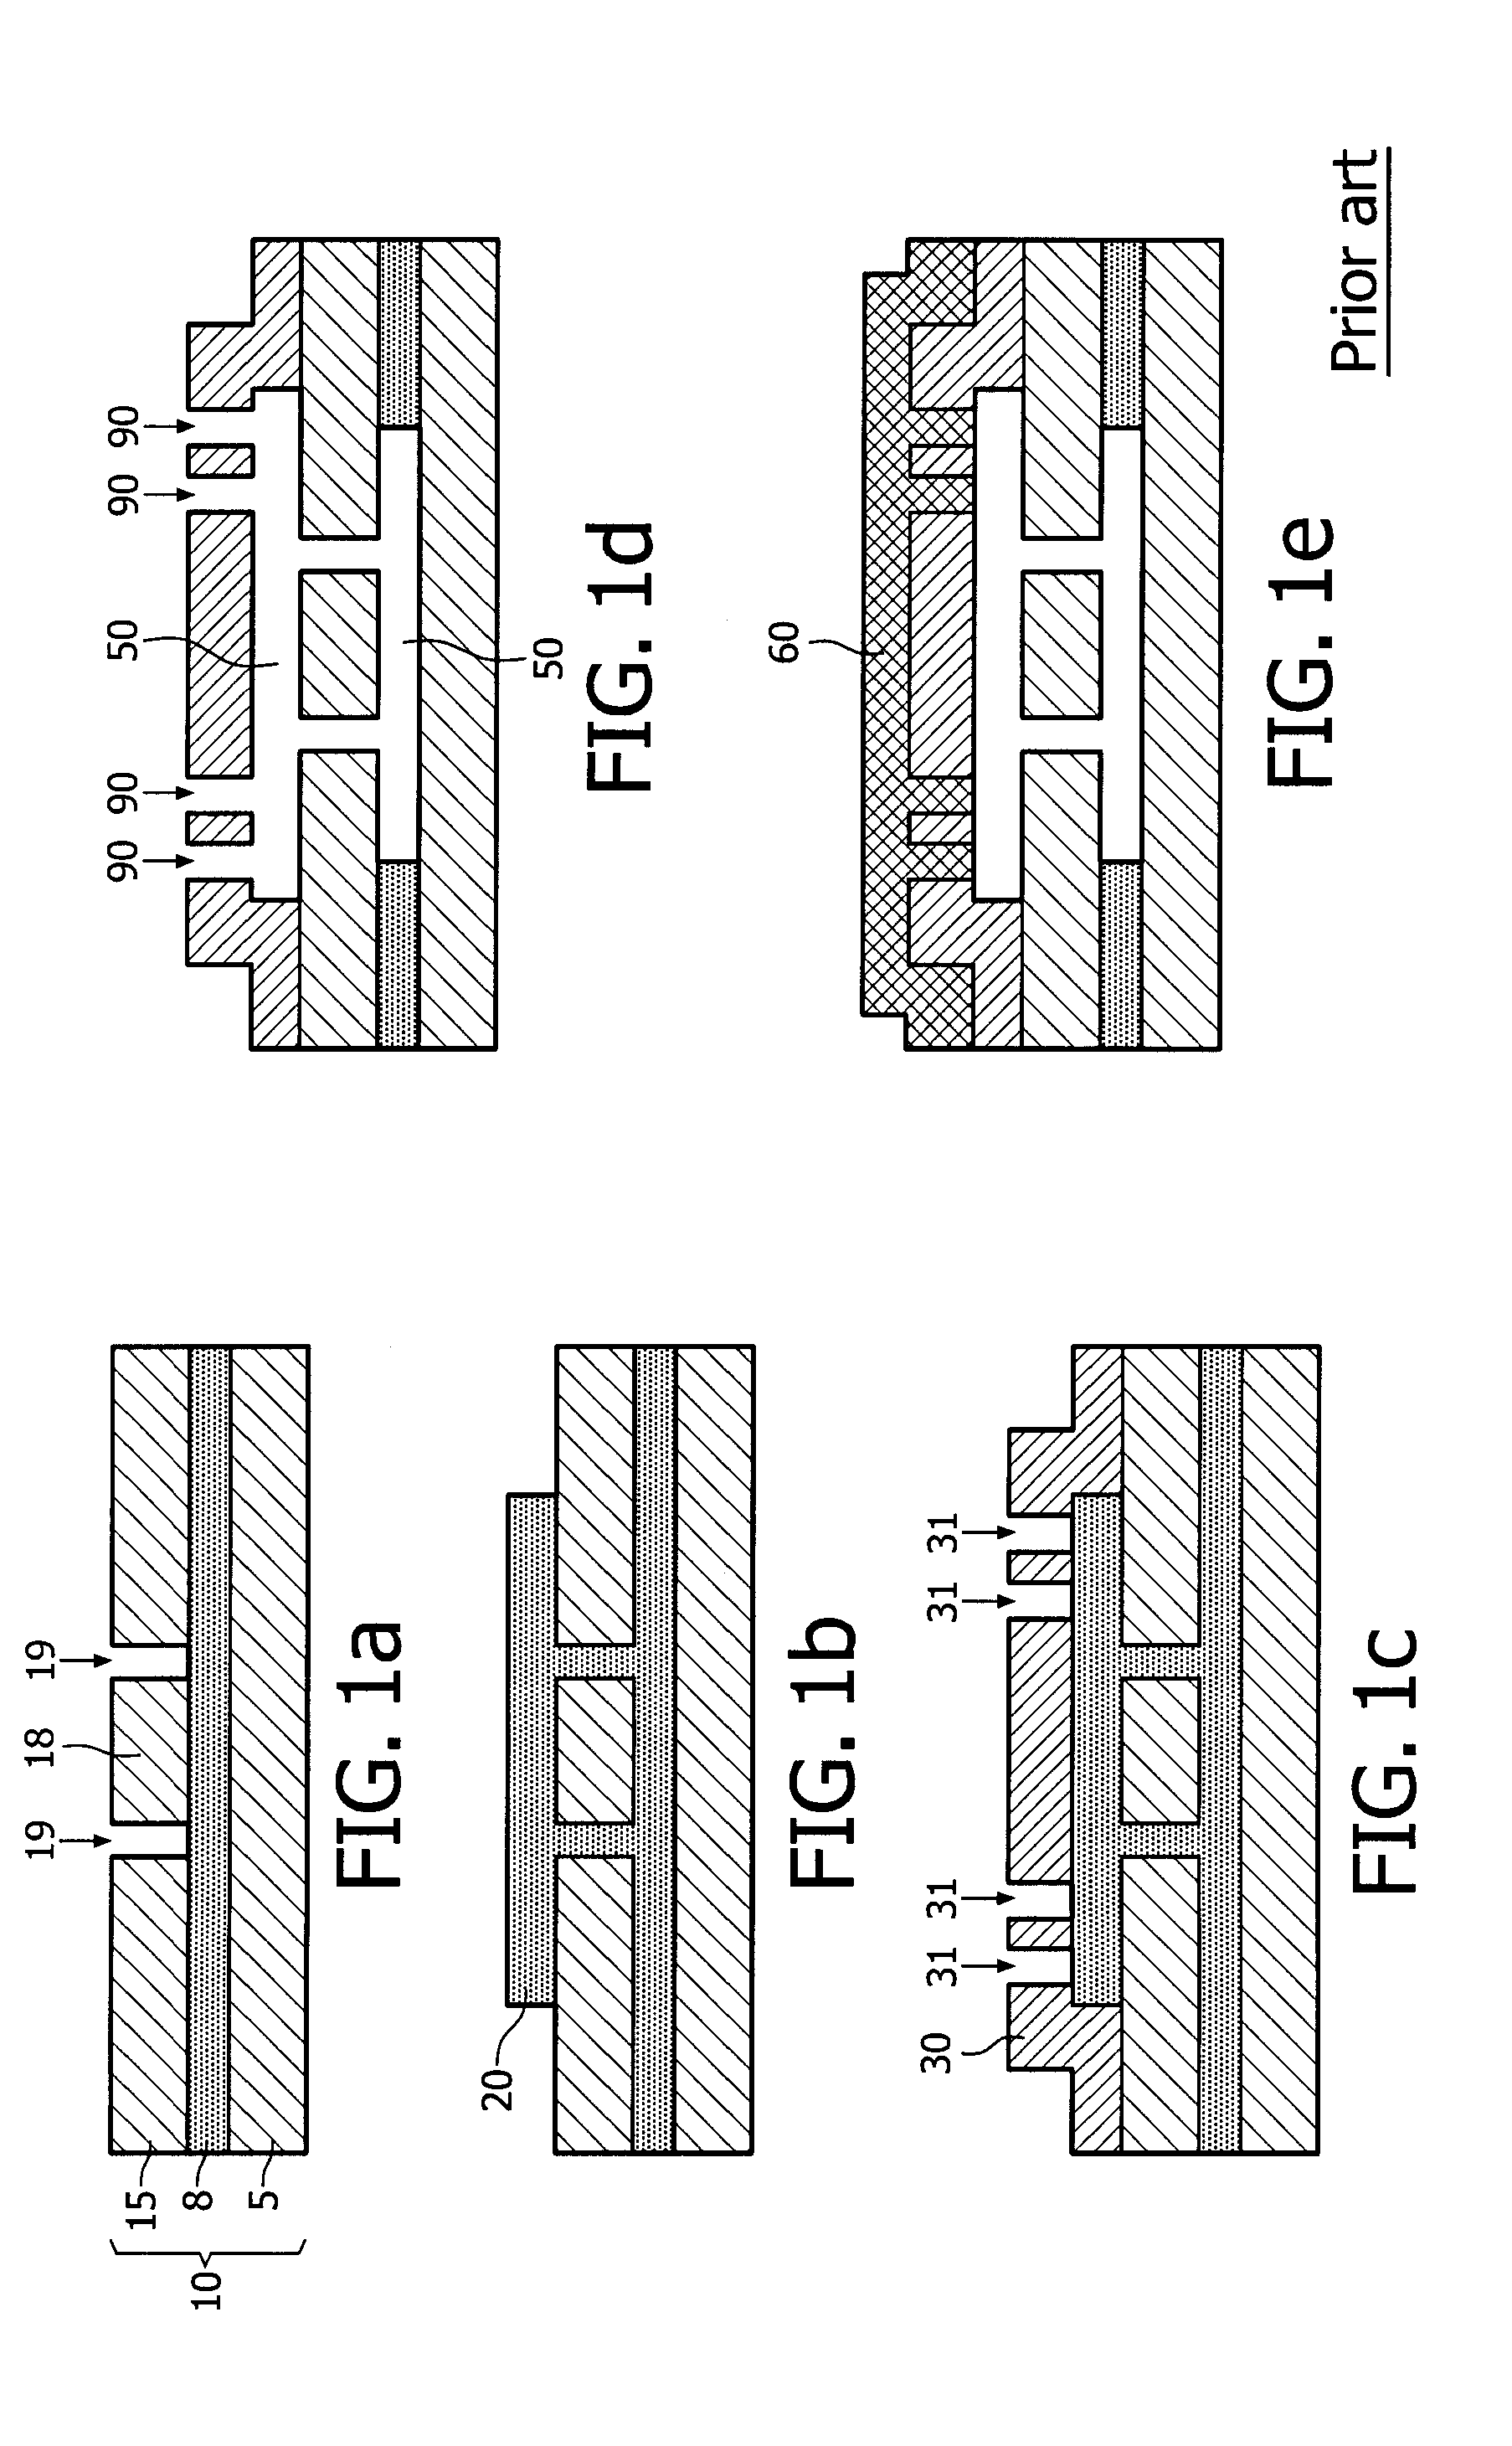 Method of manufacturing a device with a cavity